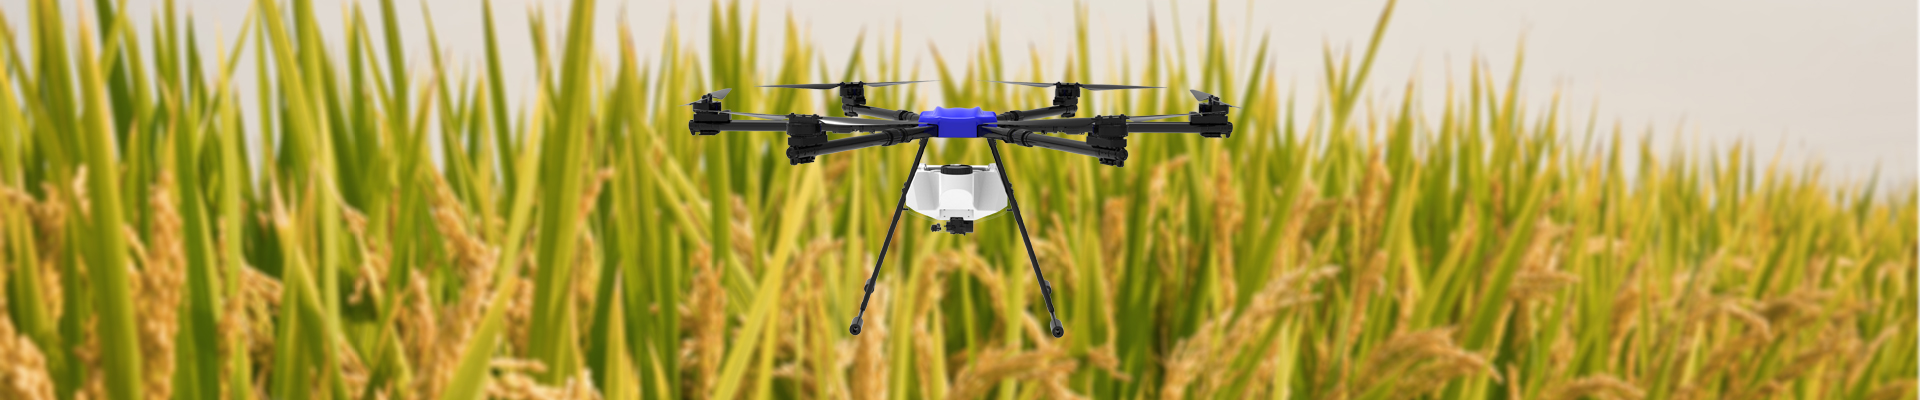 Agricultural drone-F22 Electricity